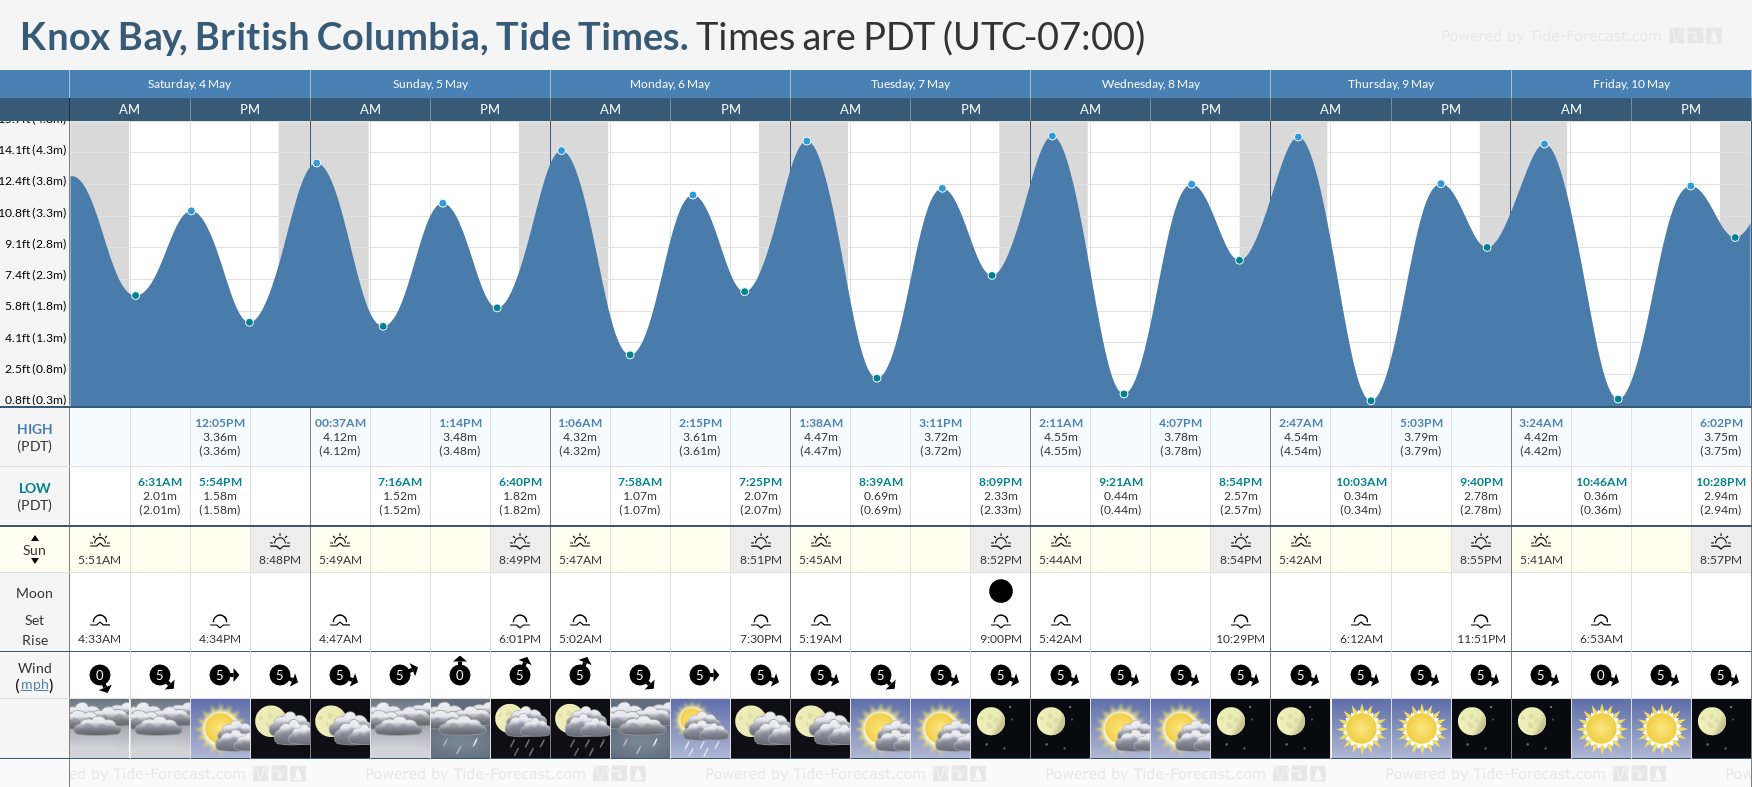 Knox Bay, British Columbia Tide Chart including high and low tide tide times for the next 7 days